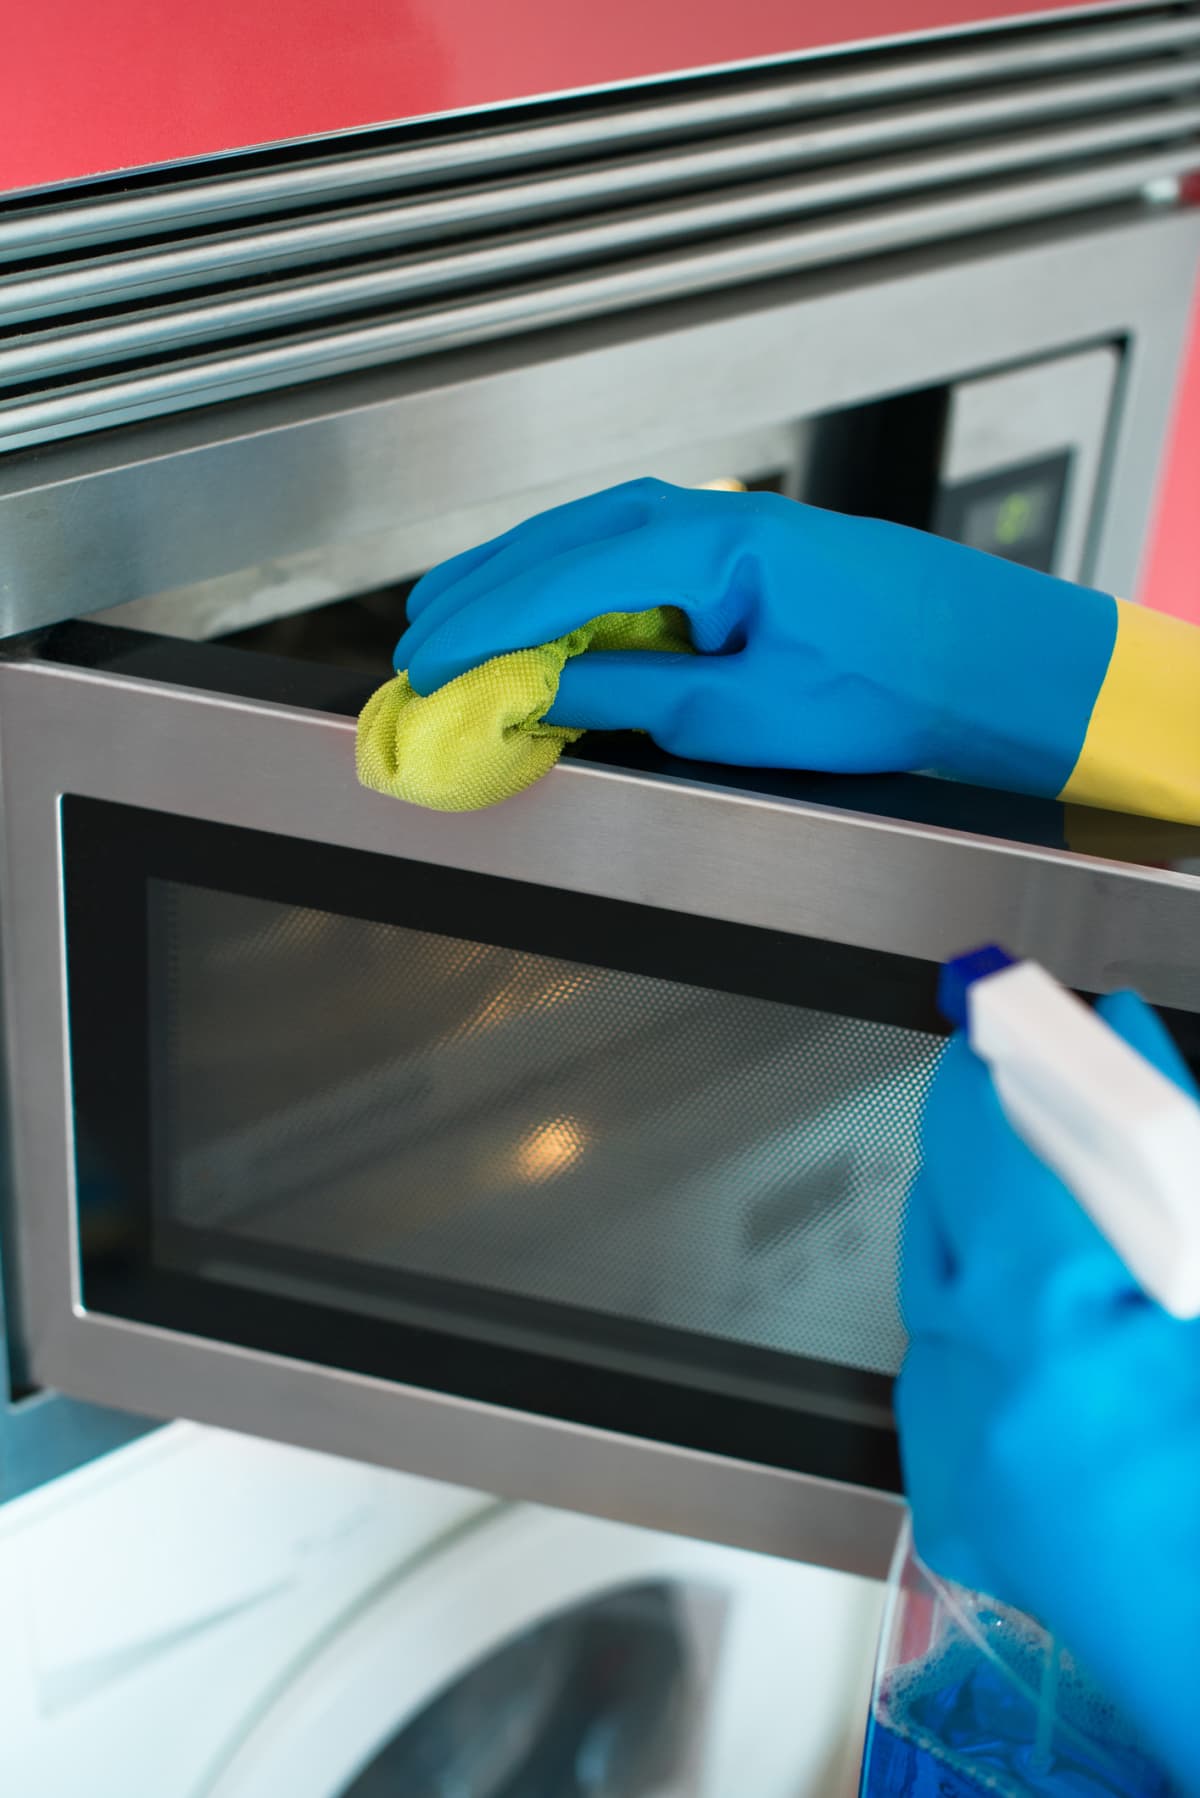 A woman wearing gloves wiping a microwave oven.